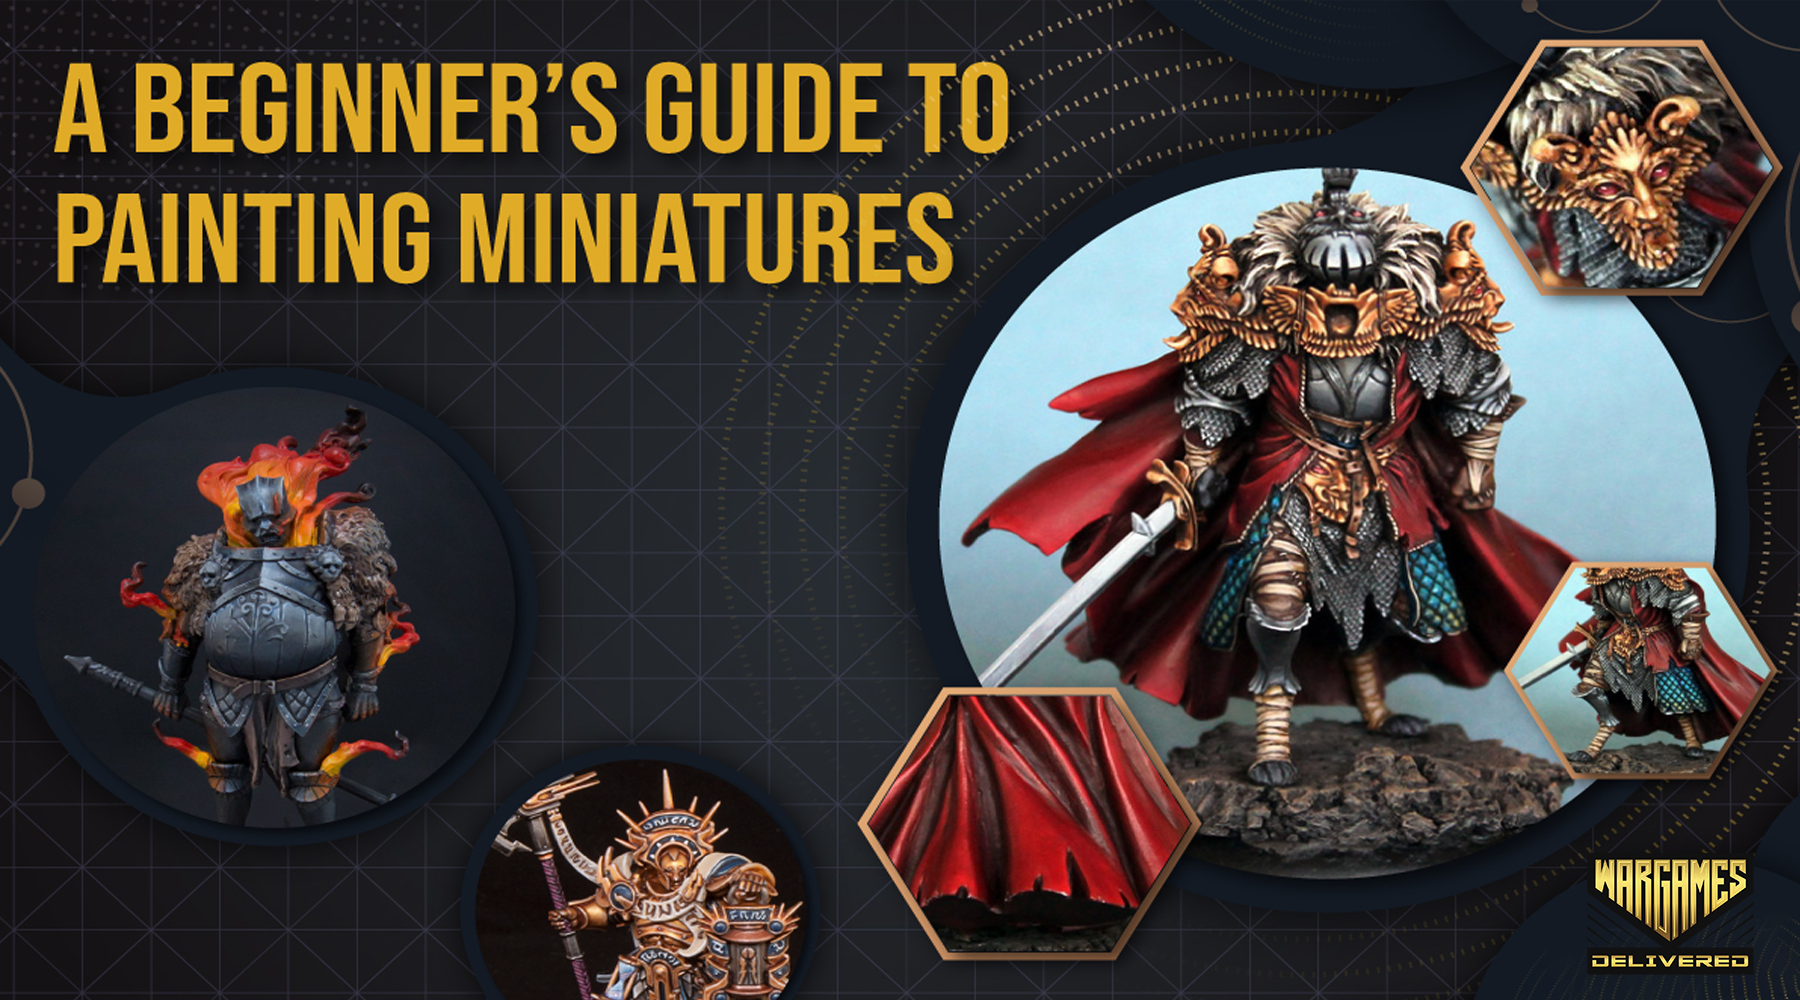 Miniature Painting Blog with Tutorials, Guides, and Gaming Articles • Page  7 of 33